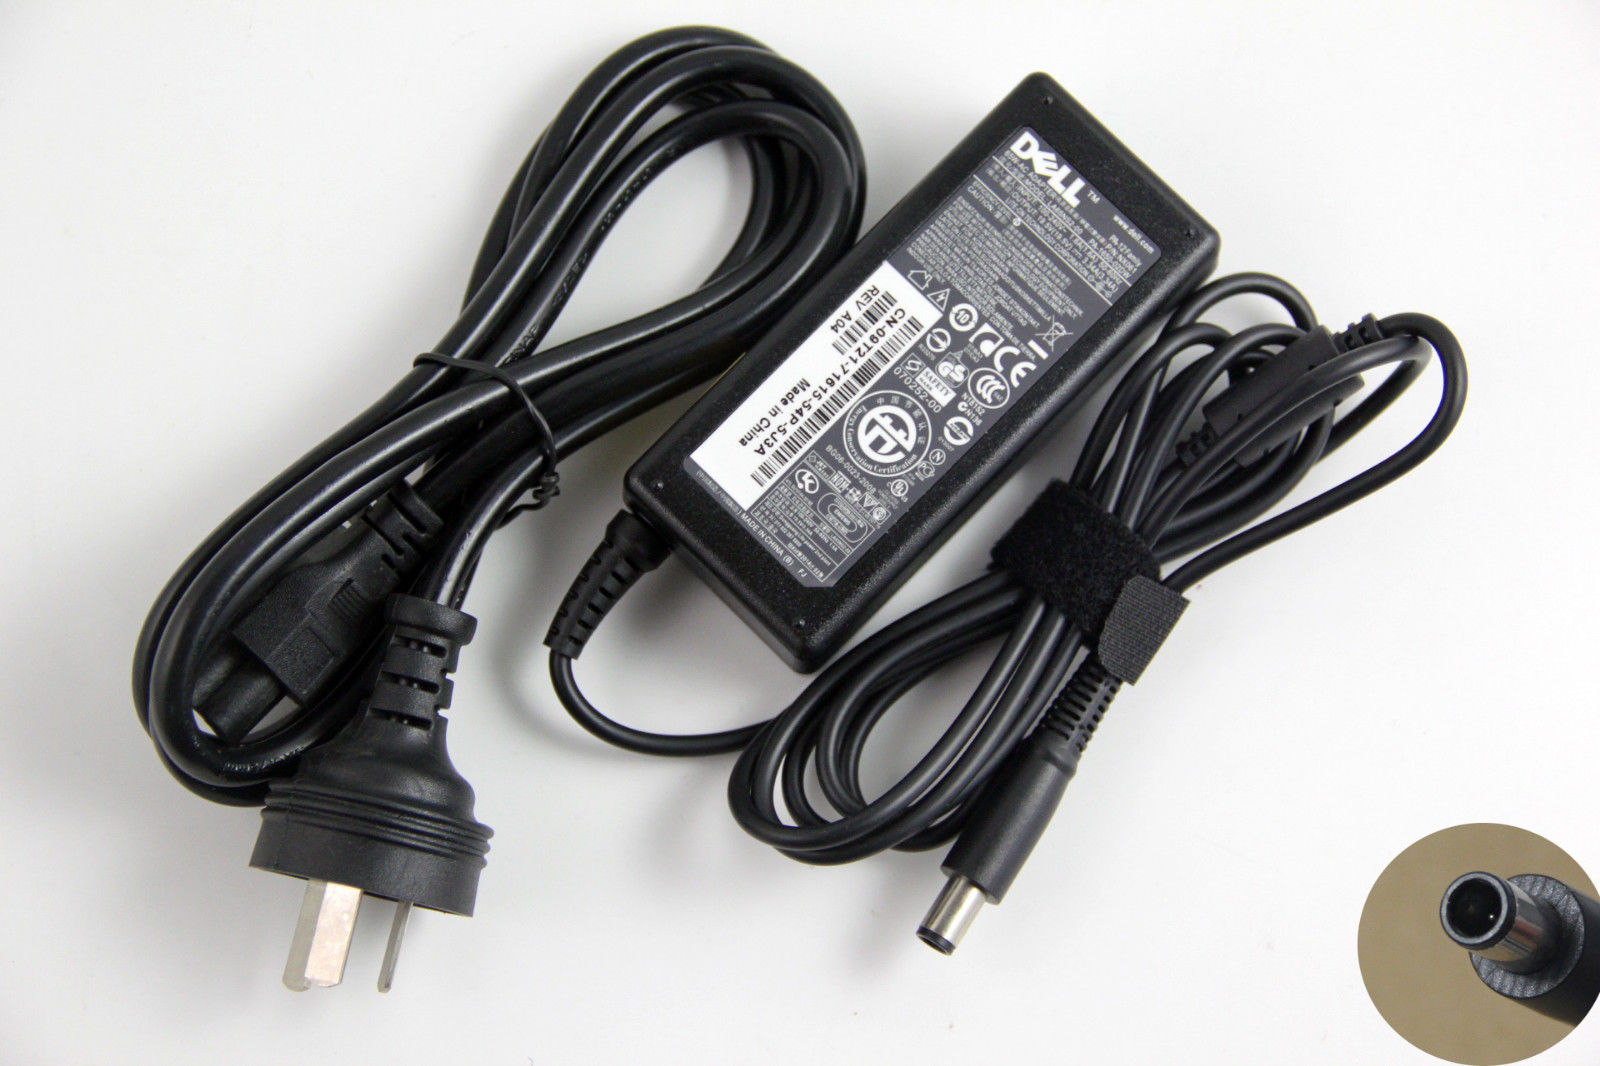 65W Genuine AC Power Adapter For Dell Inspiron 1521 1525 1526 17R(N7010)(N7110)